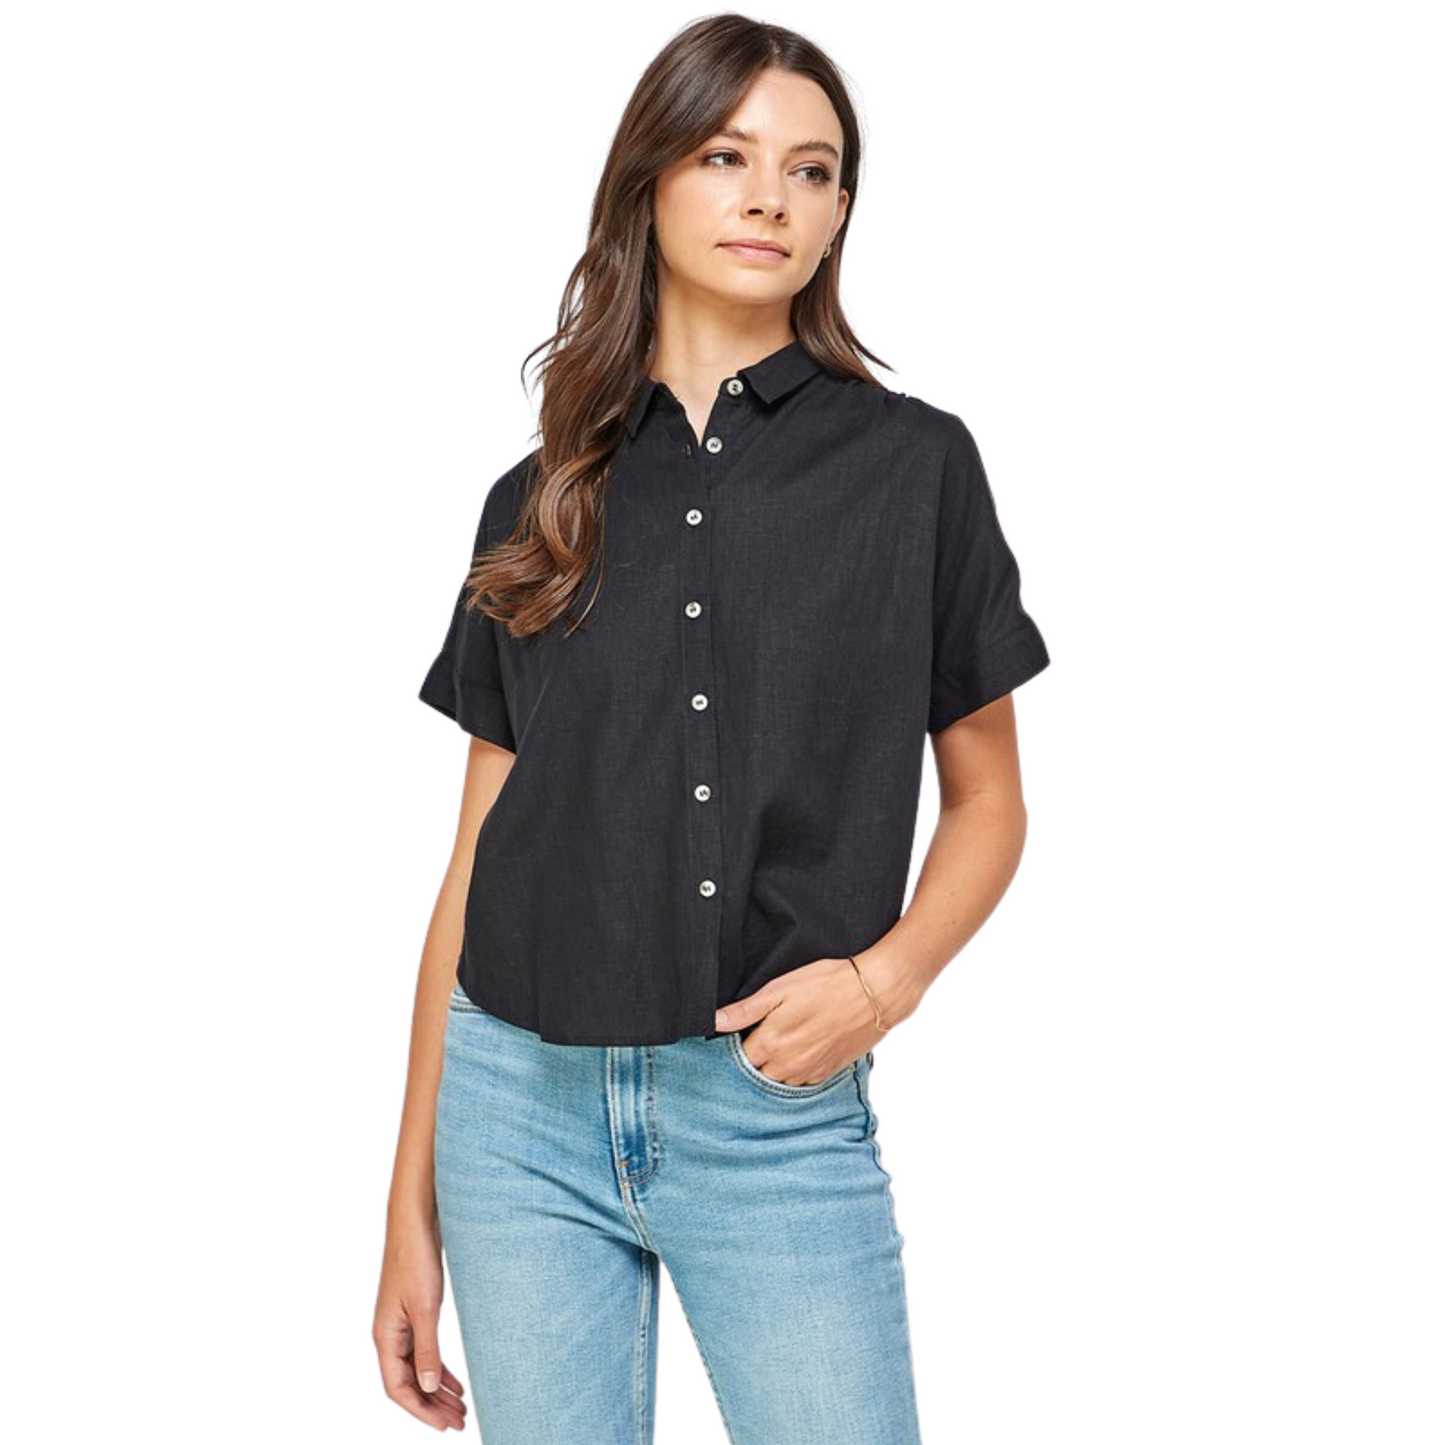 short sleeve black button down top with collar